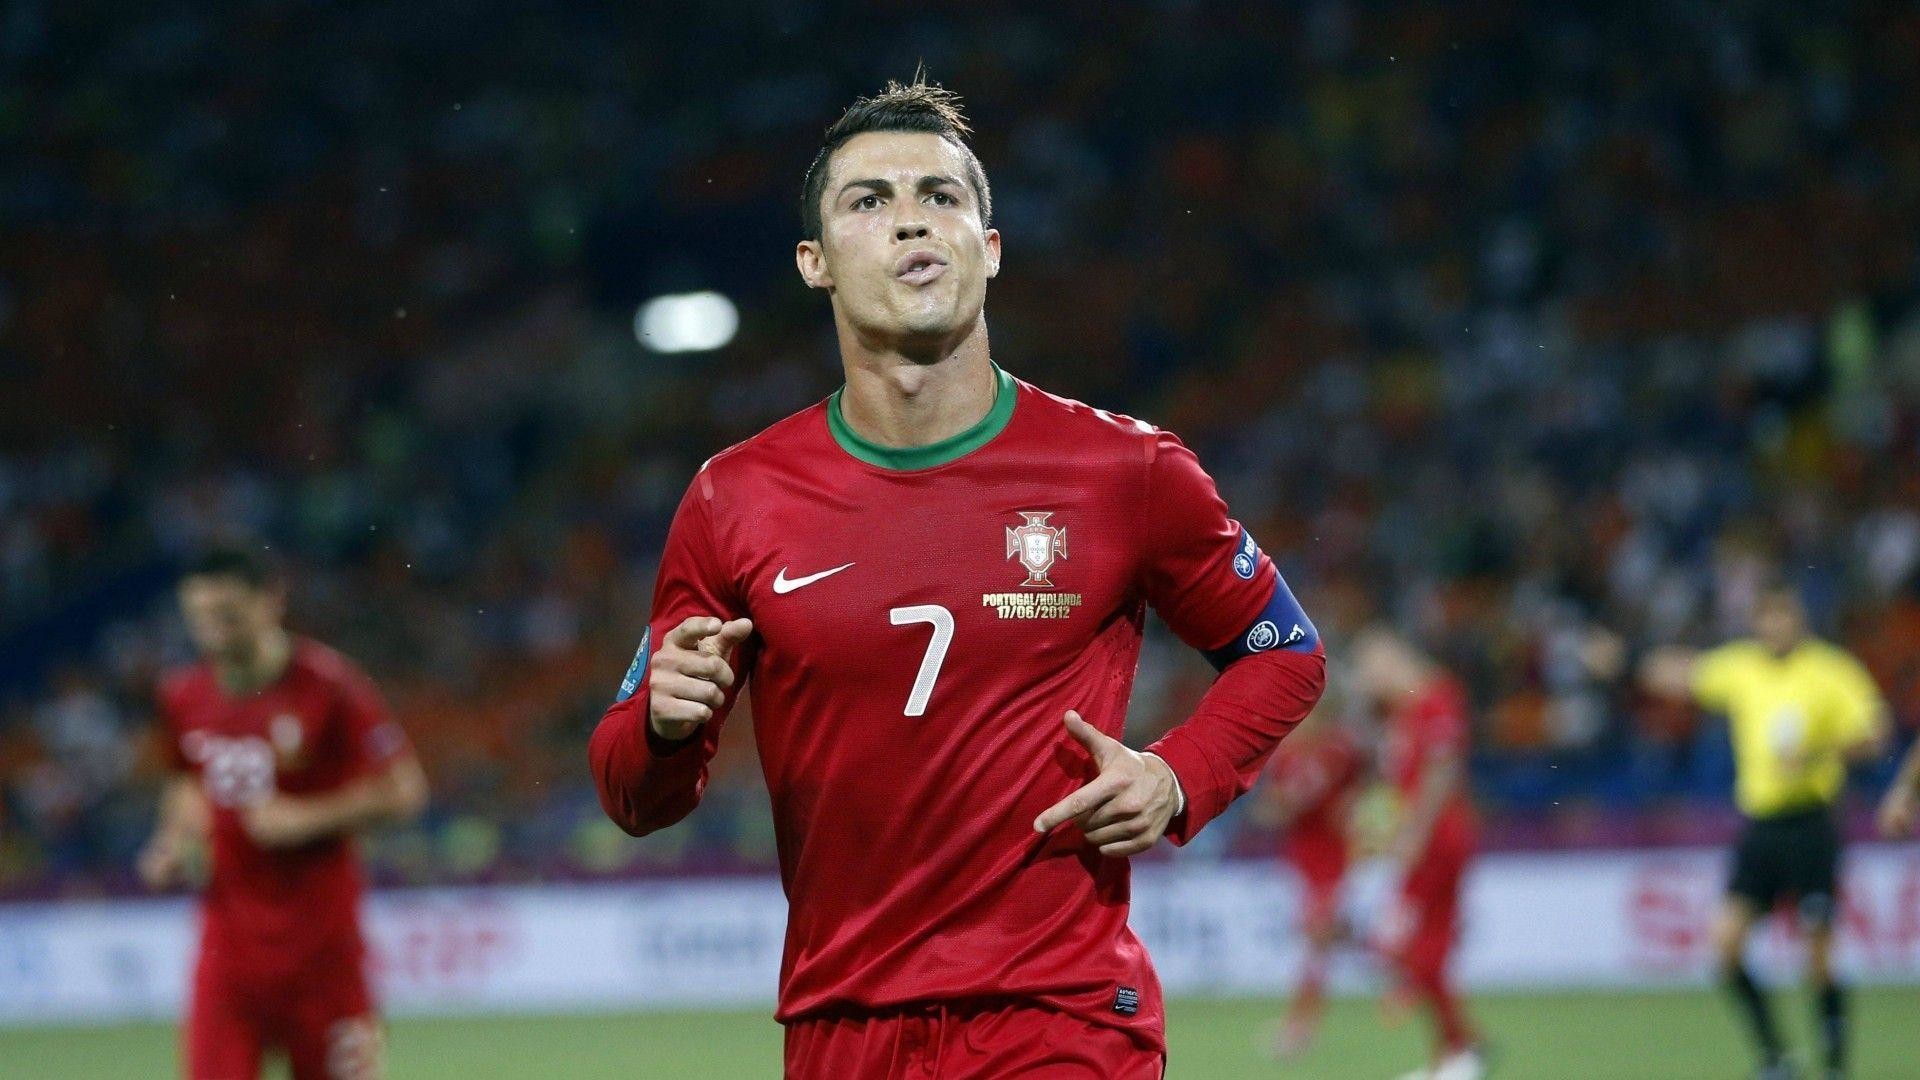 1920x1080 Cristiano Ronaldo HD Wallpapers Latest New Backgrounds